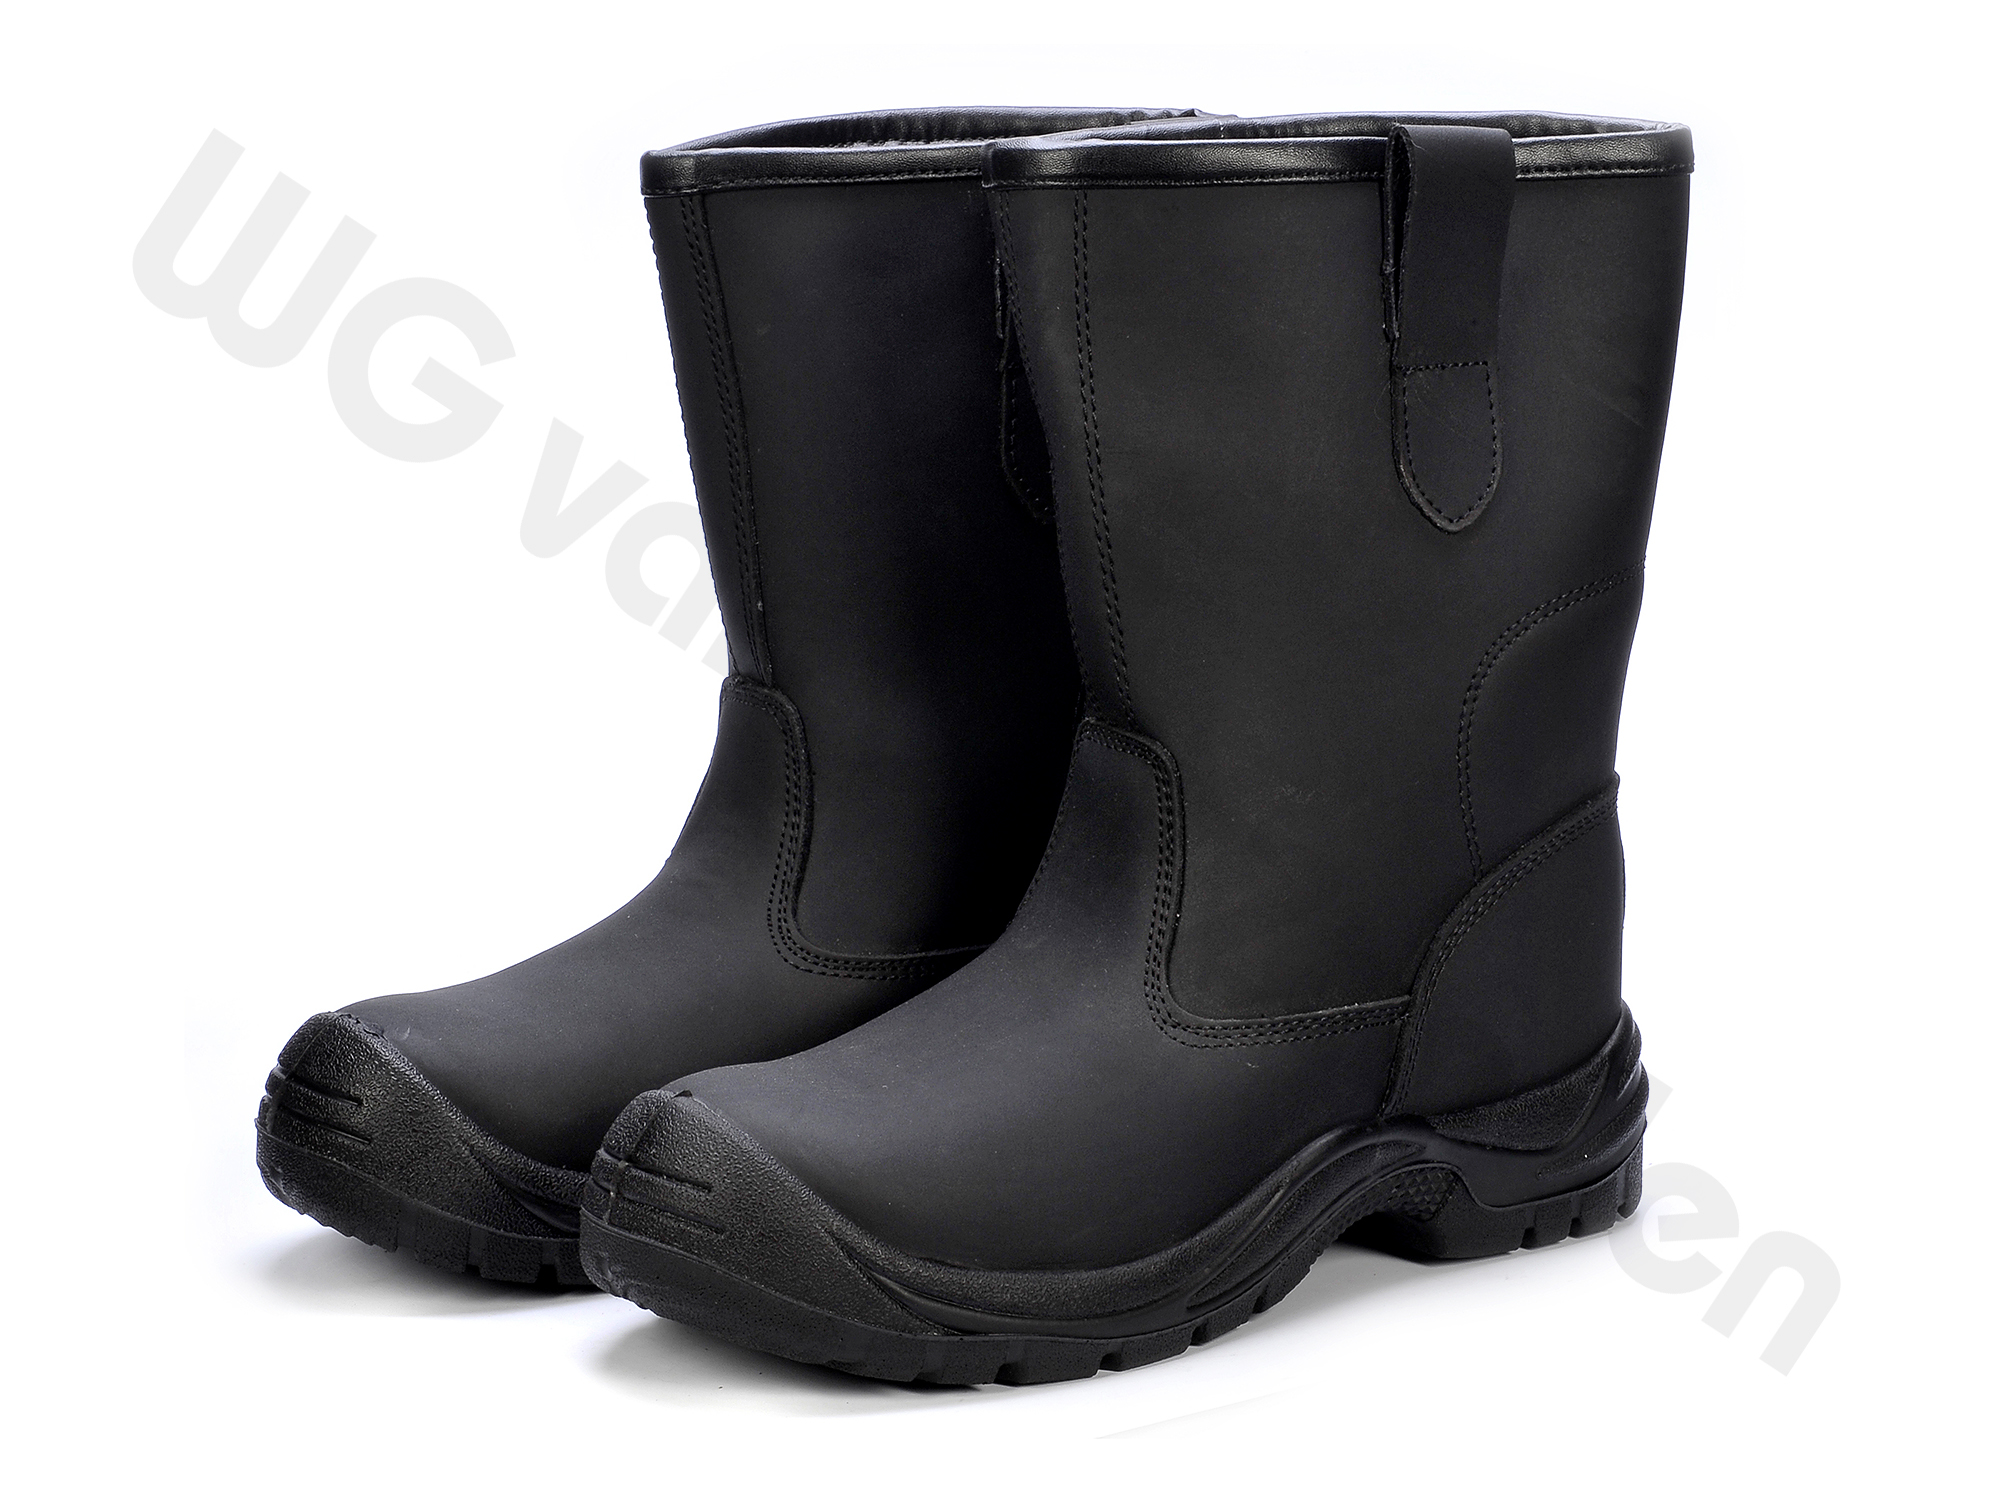 880359 BOOTS SAFETY S3 LEATHER W/STEEL TOE AND LINING 48/30CM